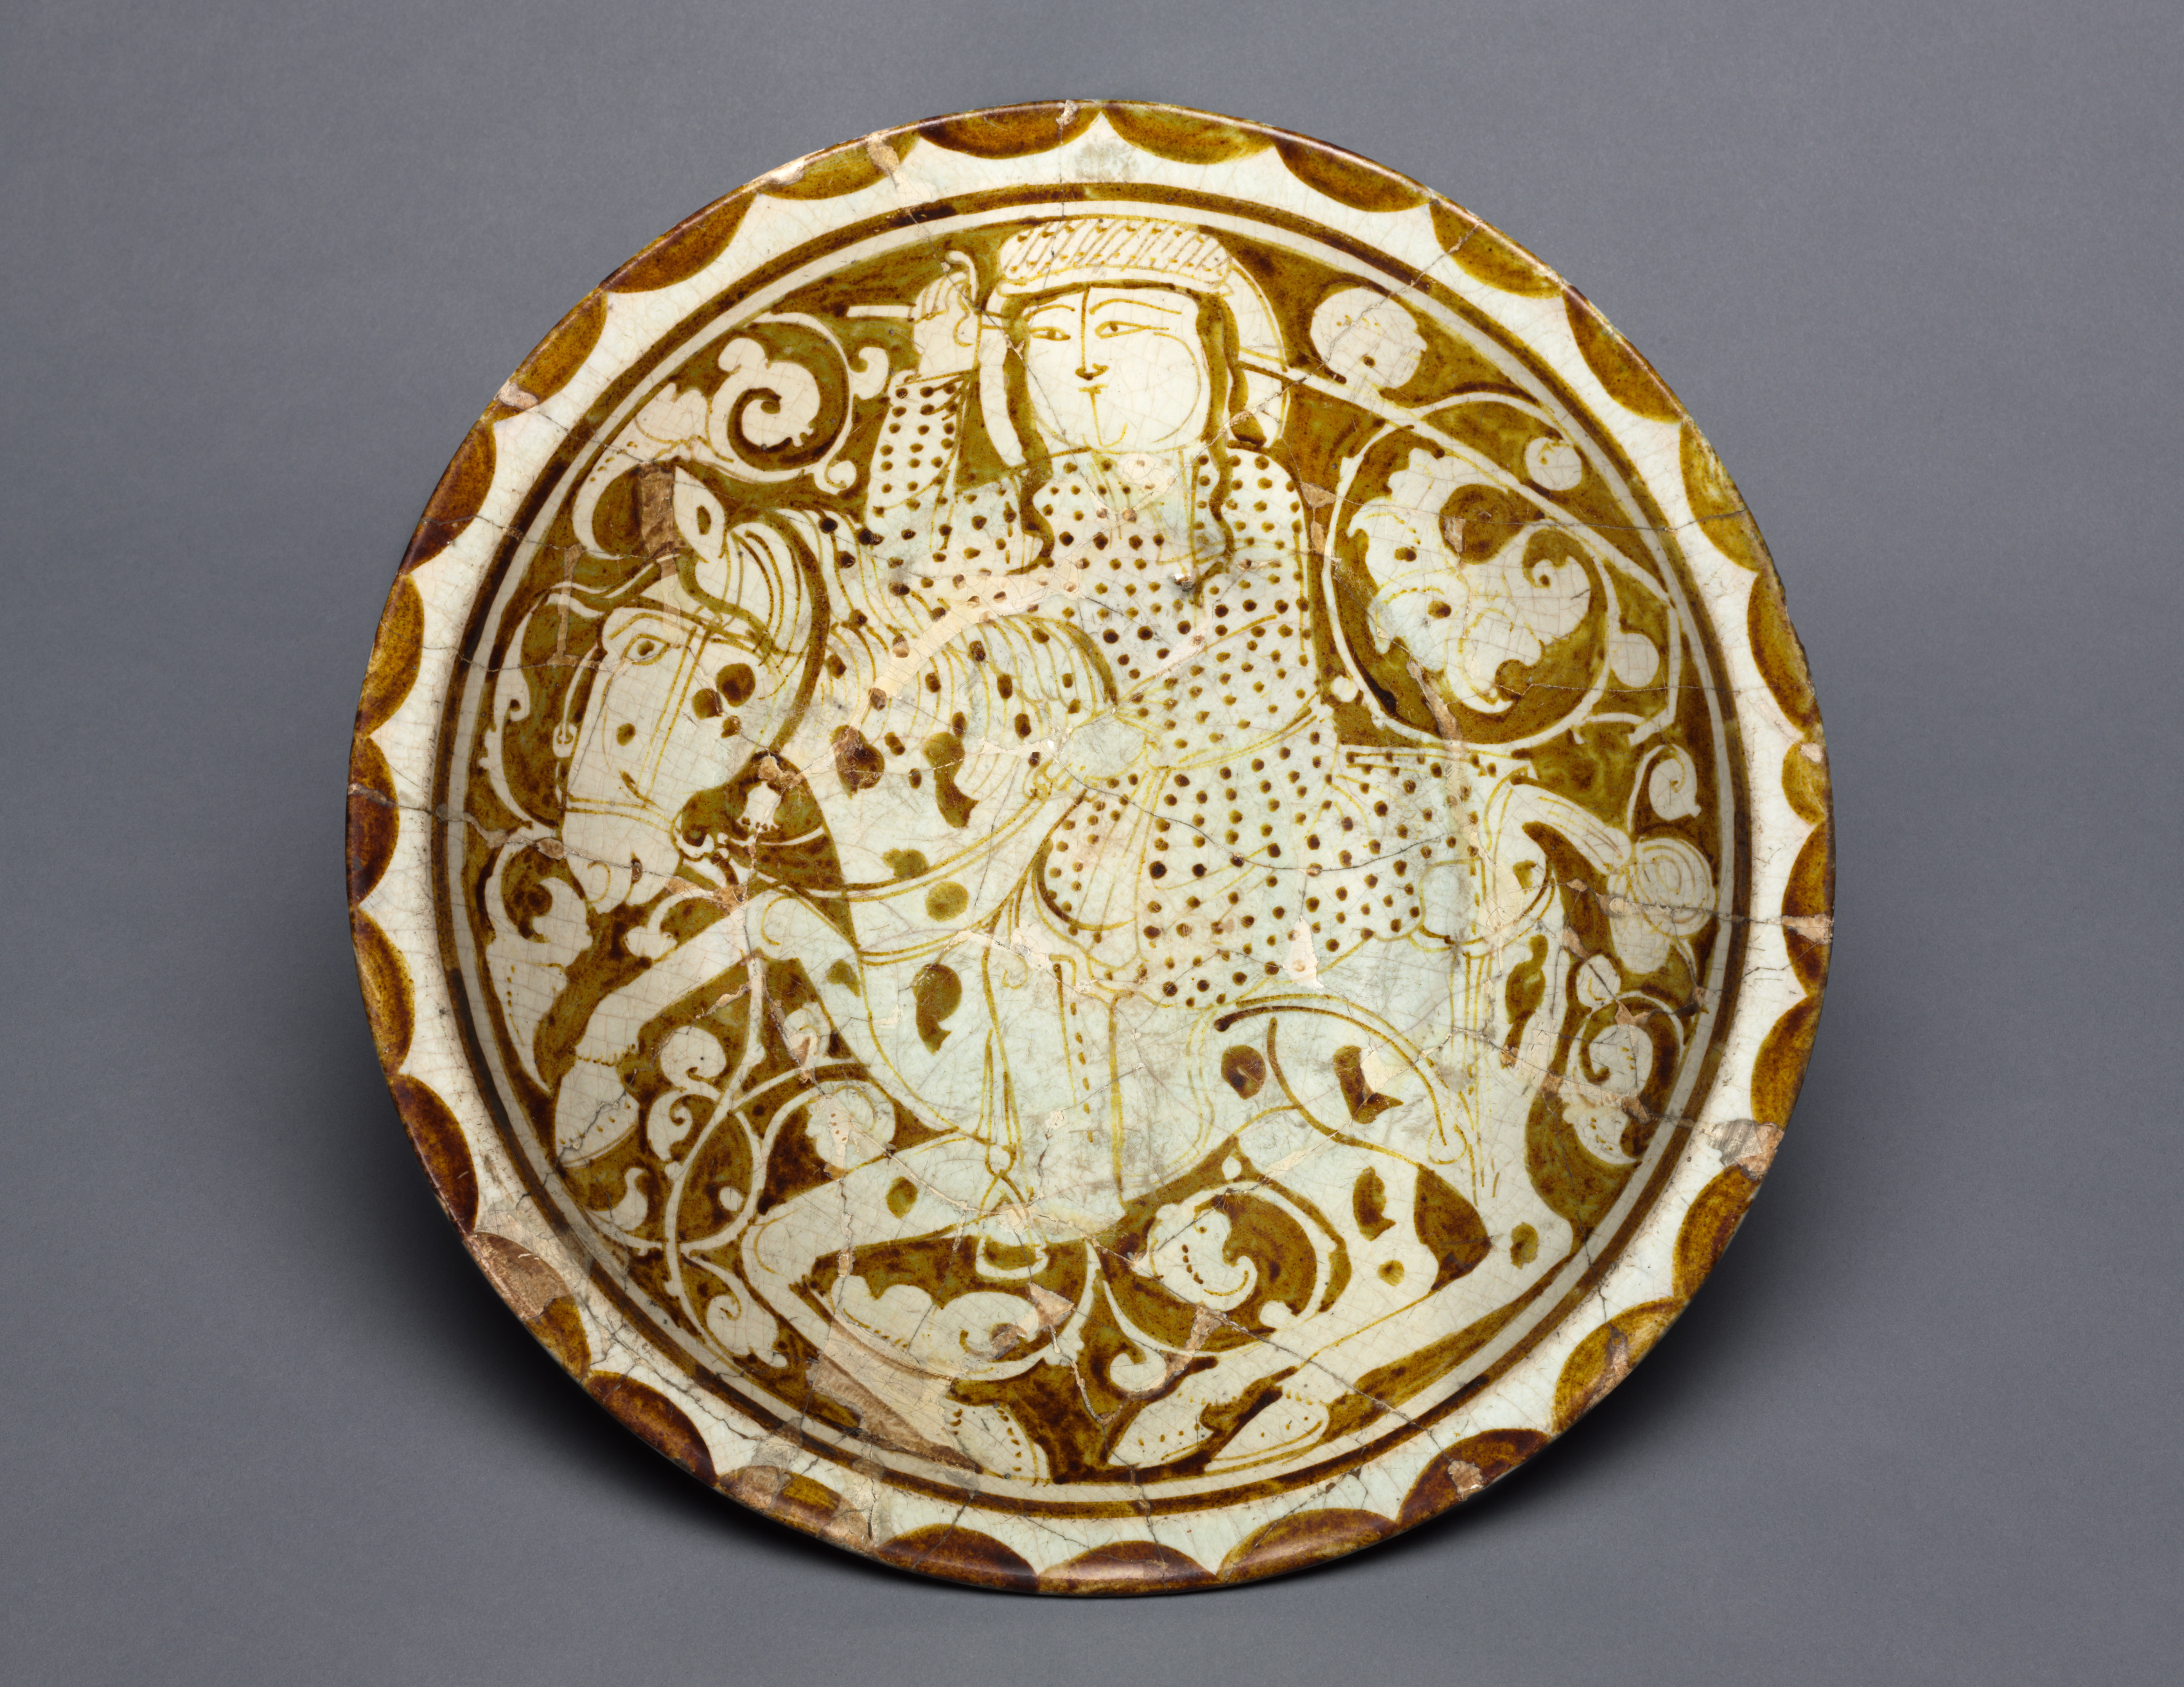 Luster Dish with Polo Player